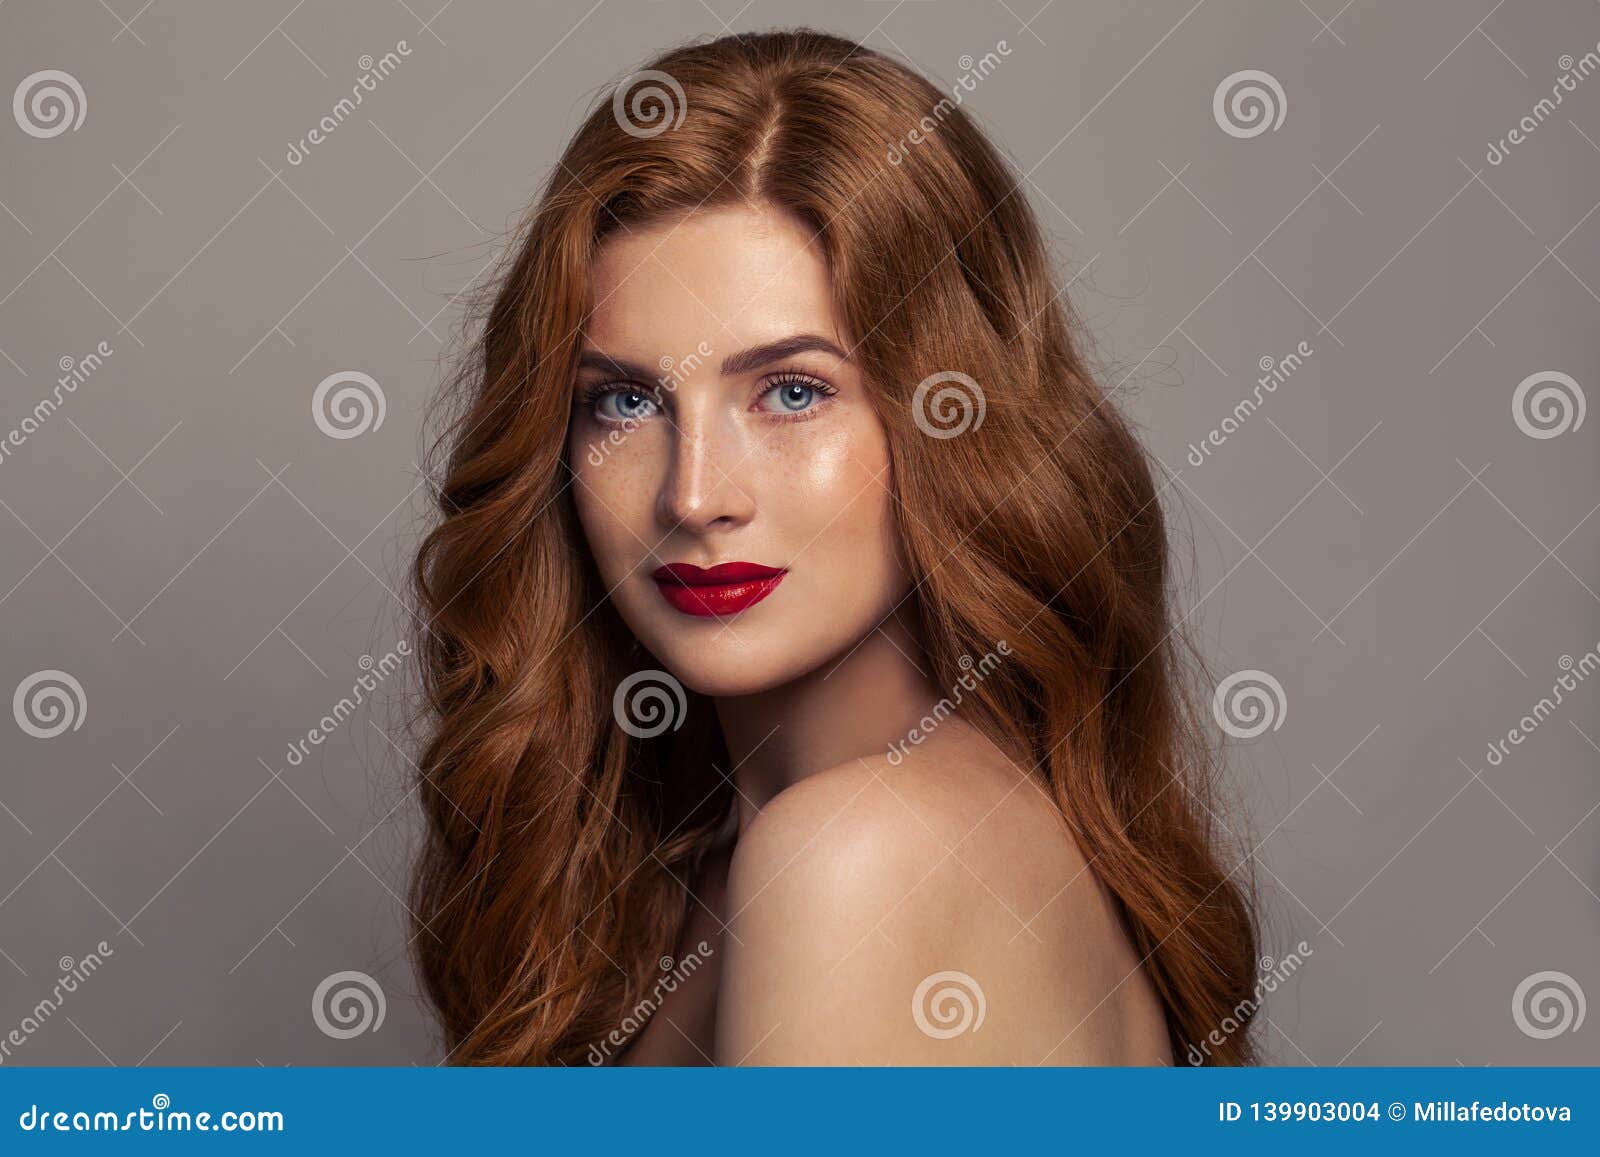 natural beauty. redhead european girl with red hair and